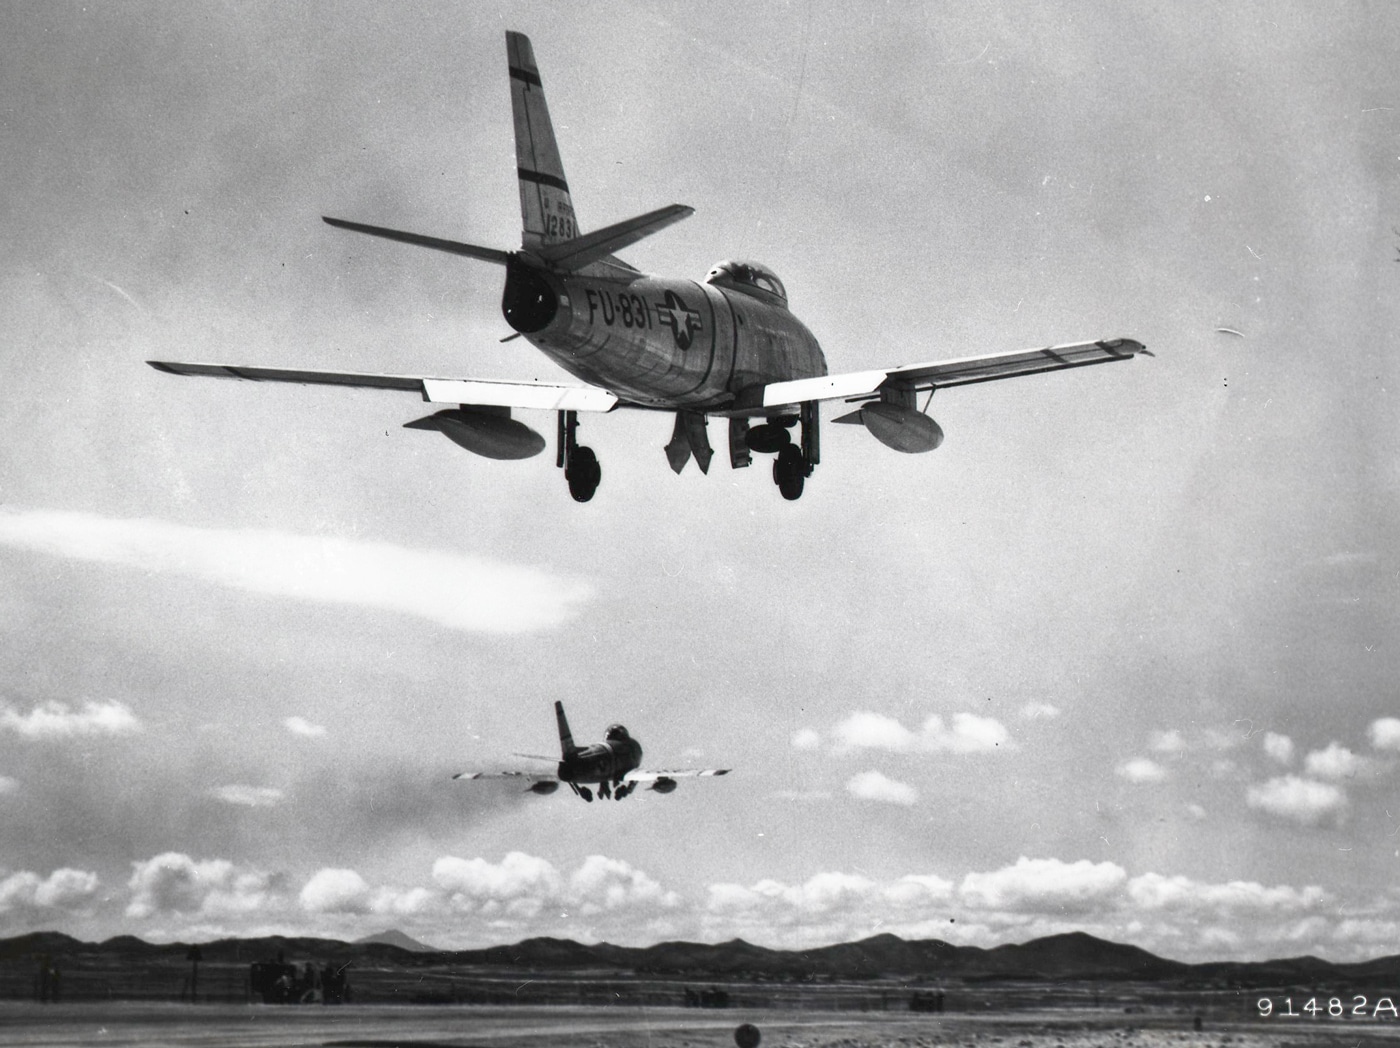 Here we see a pair of North American F-86a Sabre transonic jet fighter aircraft take off to do battle with the communist invaders. The armament of these jets included six (6) M3 Browning machine guns chambered for the .50 BMG cartridge. These .50 caliber guns were in the nose of the aircraft. Other versions of the plane were fitted with 20mm cannons, unguided rockets and napalm. This made them effective as mobile artillery that could bring in a lot of firepower to front line troops in contact with the enemy. 